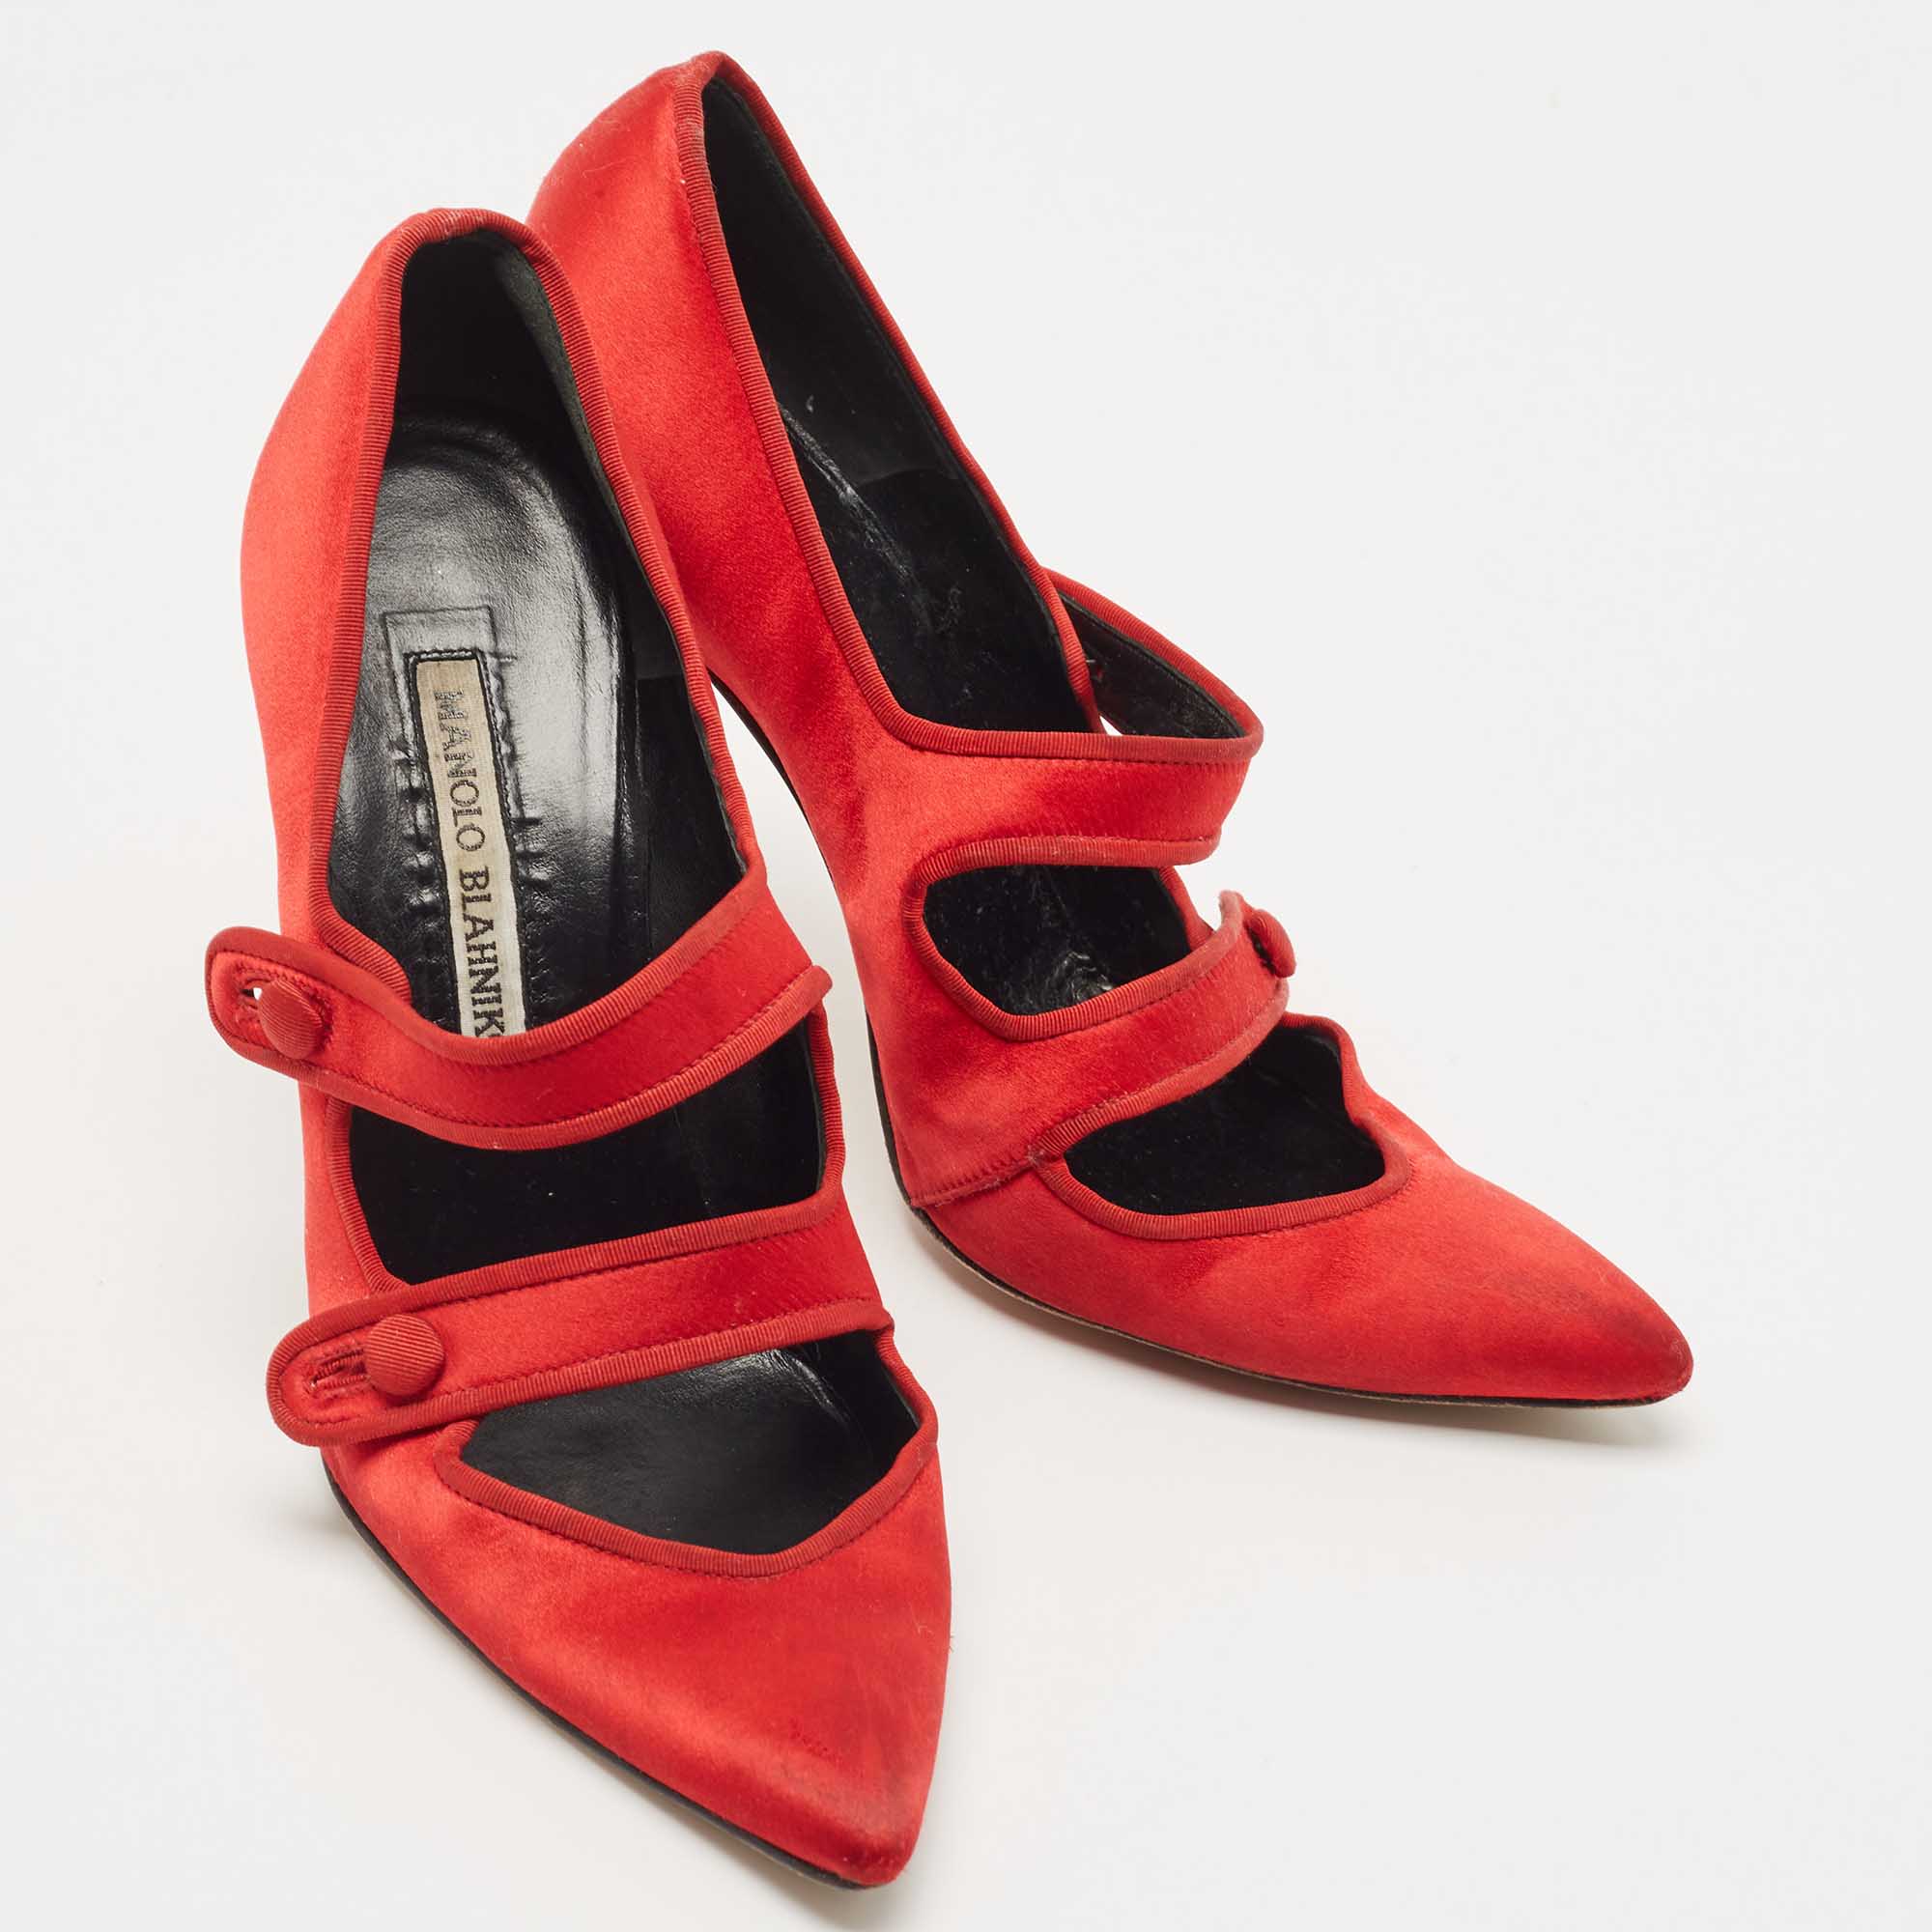 Manolo Blahnik Red Satin Pointed Toe Strap Pumps Size 37